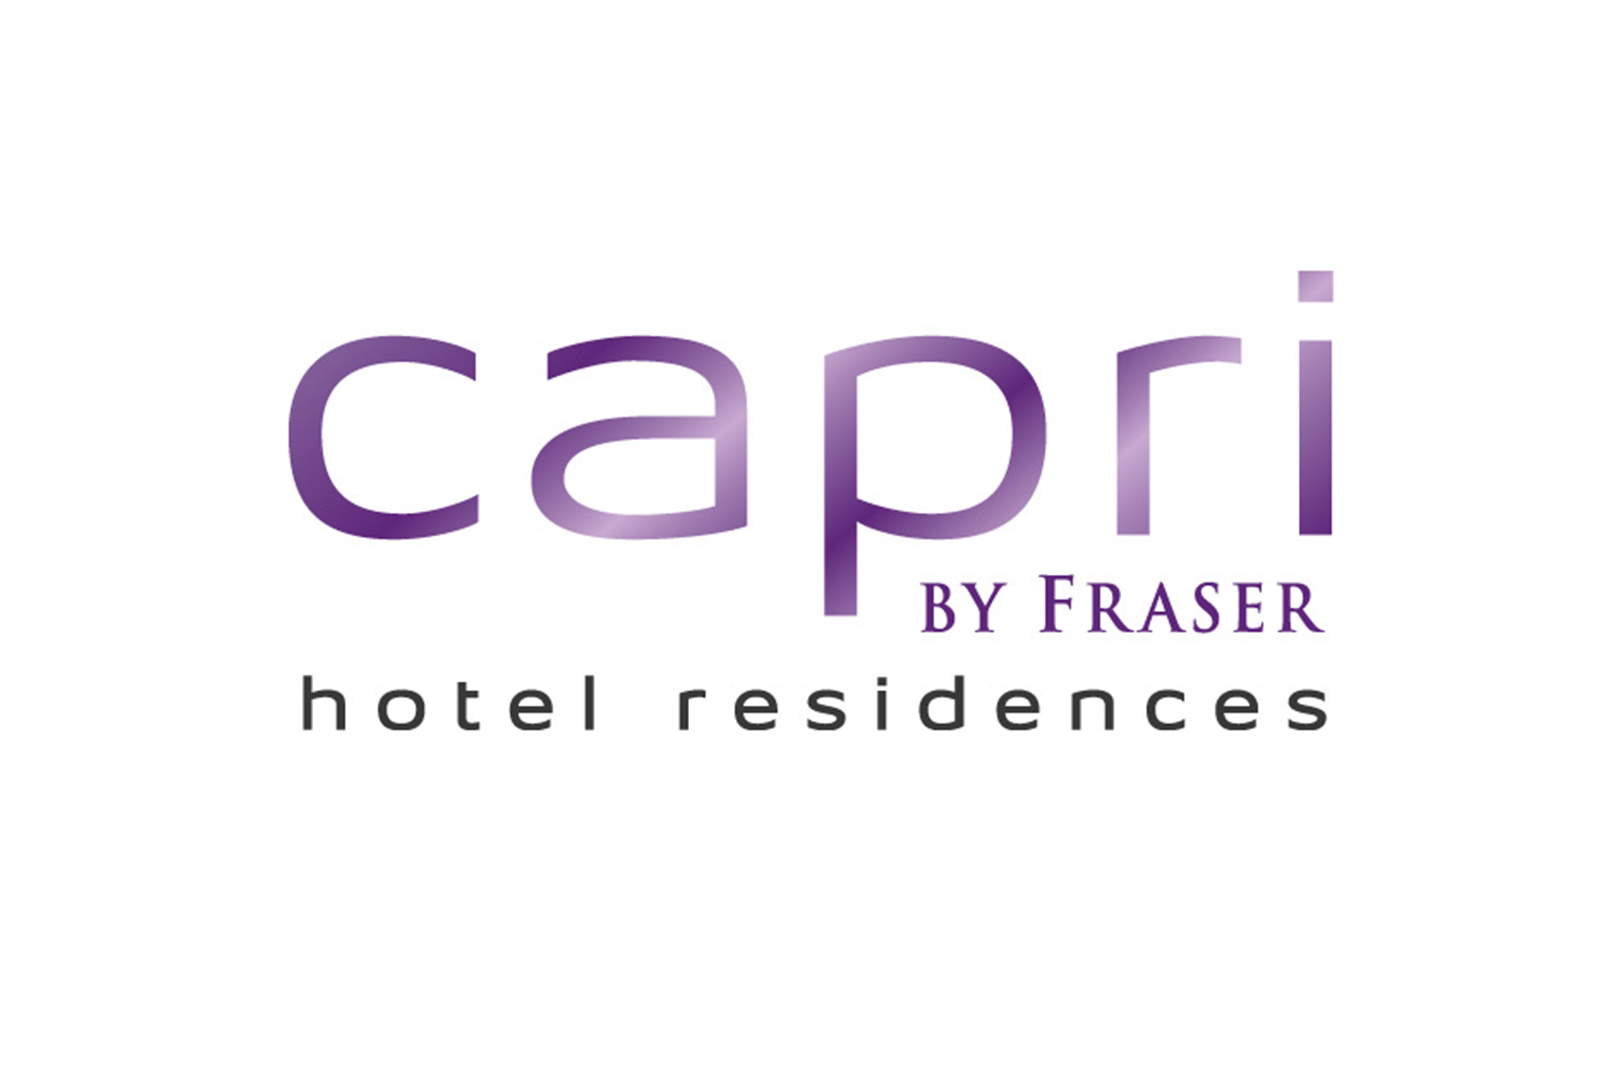 Frasers Hospitality Pte Ltd Set to Further Grow Capri by Fraser Brand